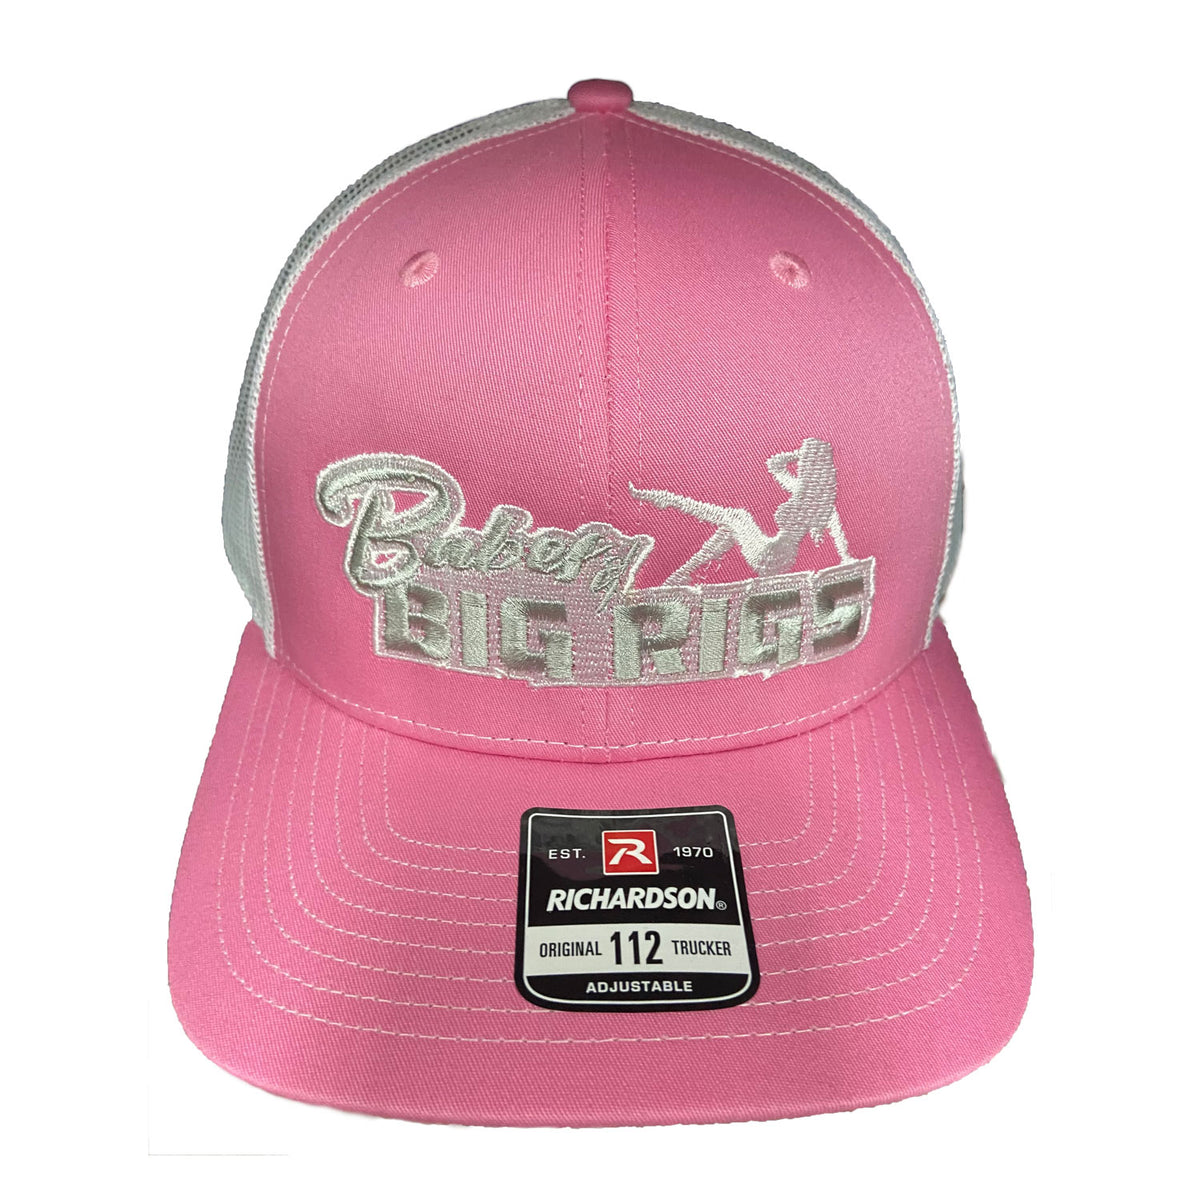 Babes and Big Rigs Trucker Hats